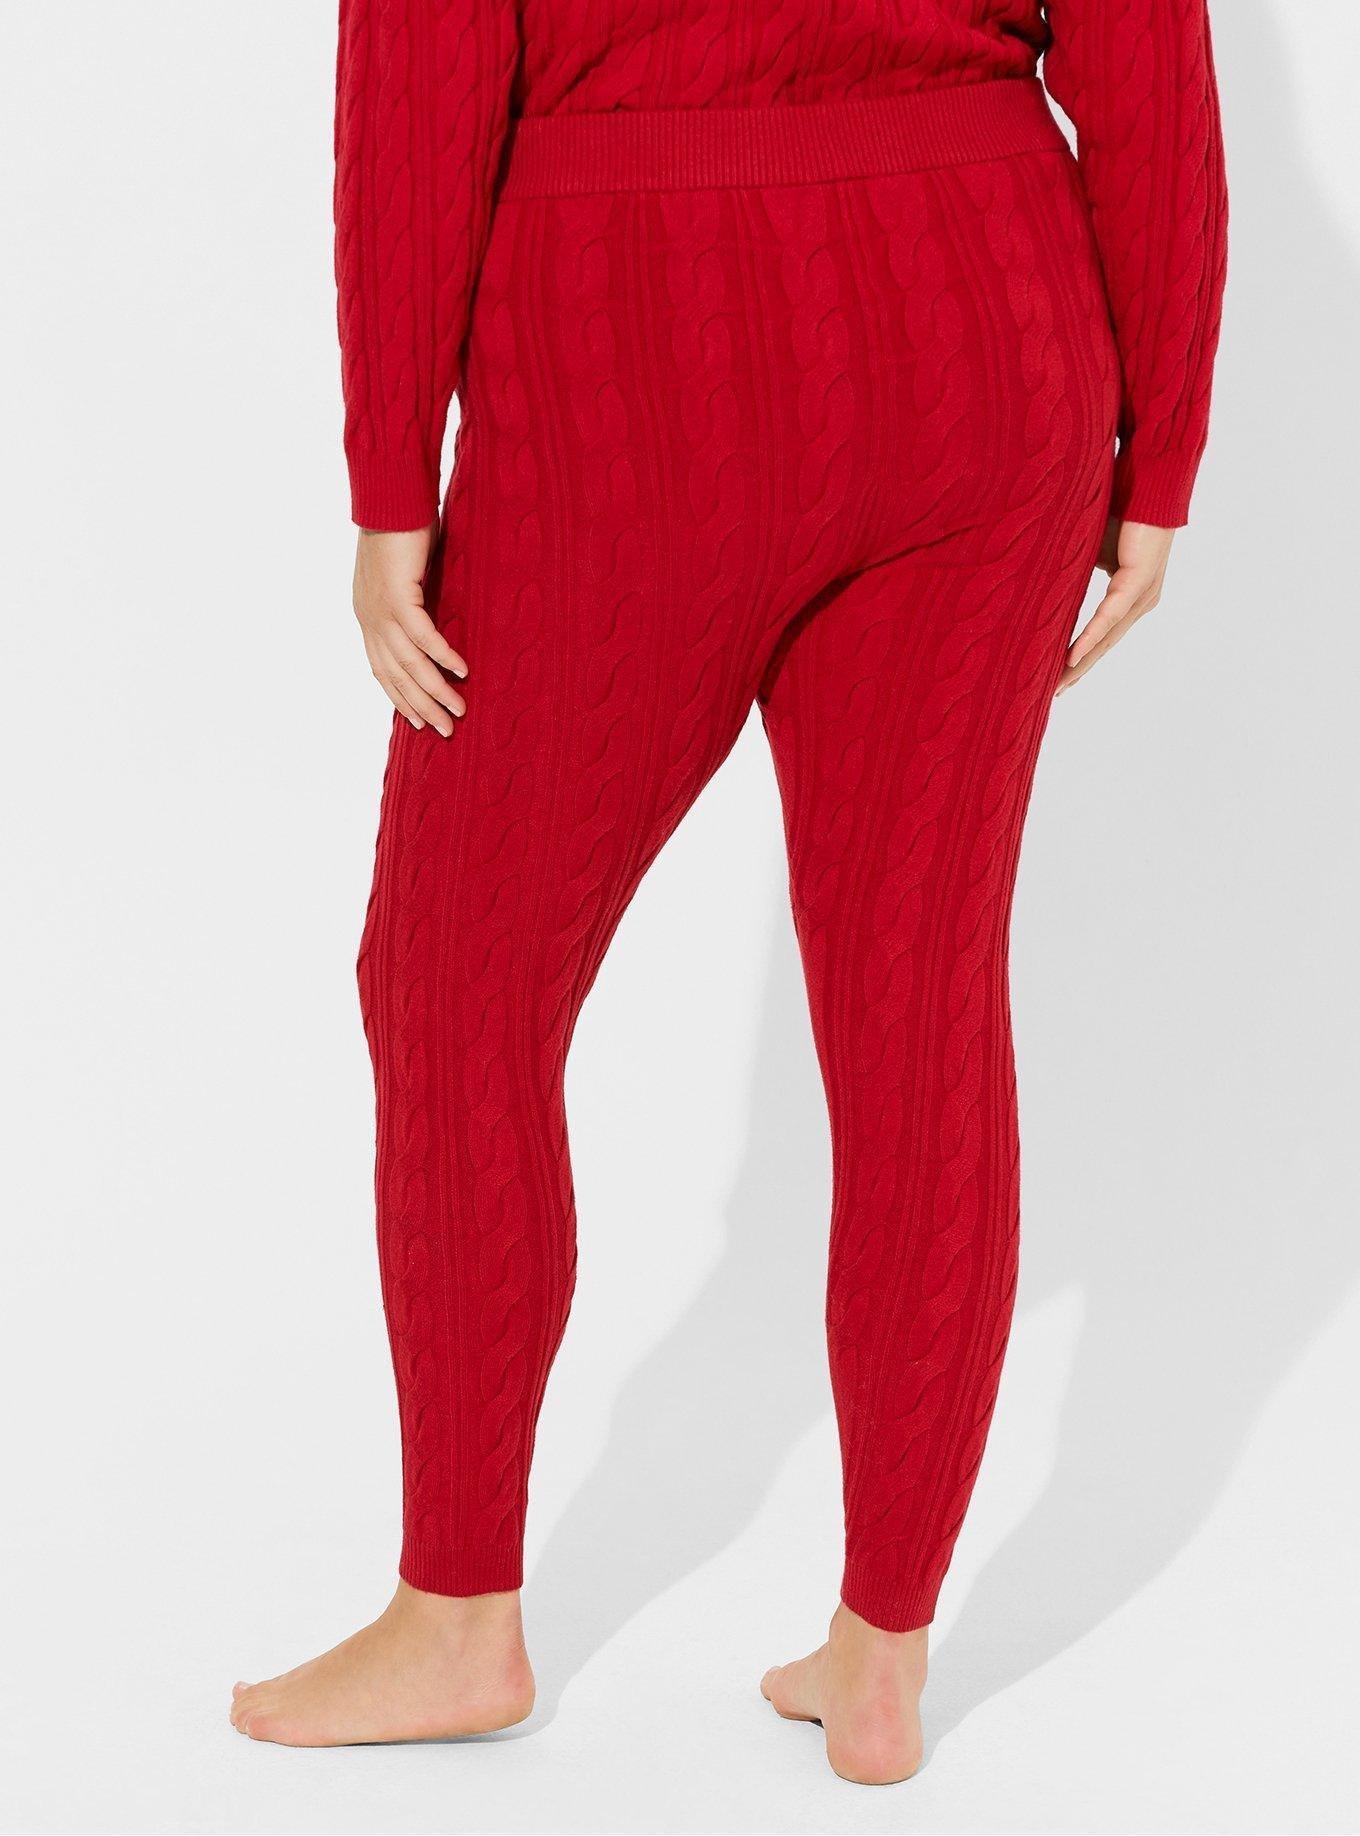 Plus Size Wide Waistband Cable Knit Leggings - Red